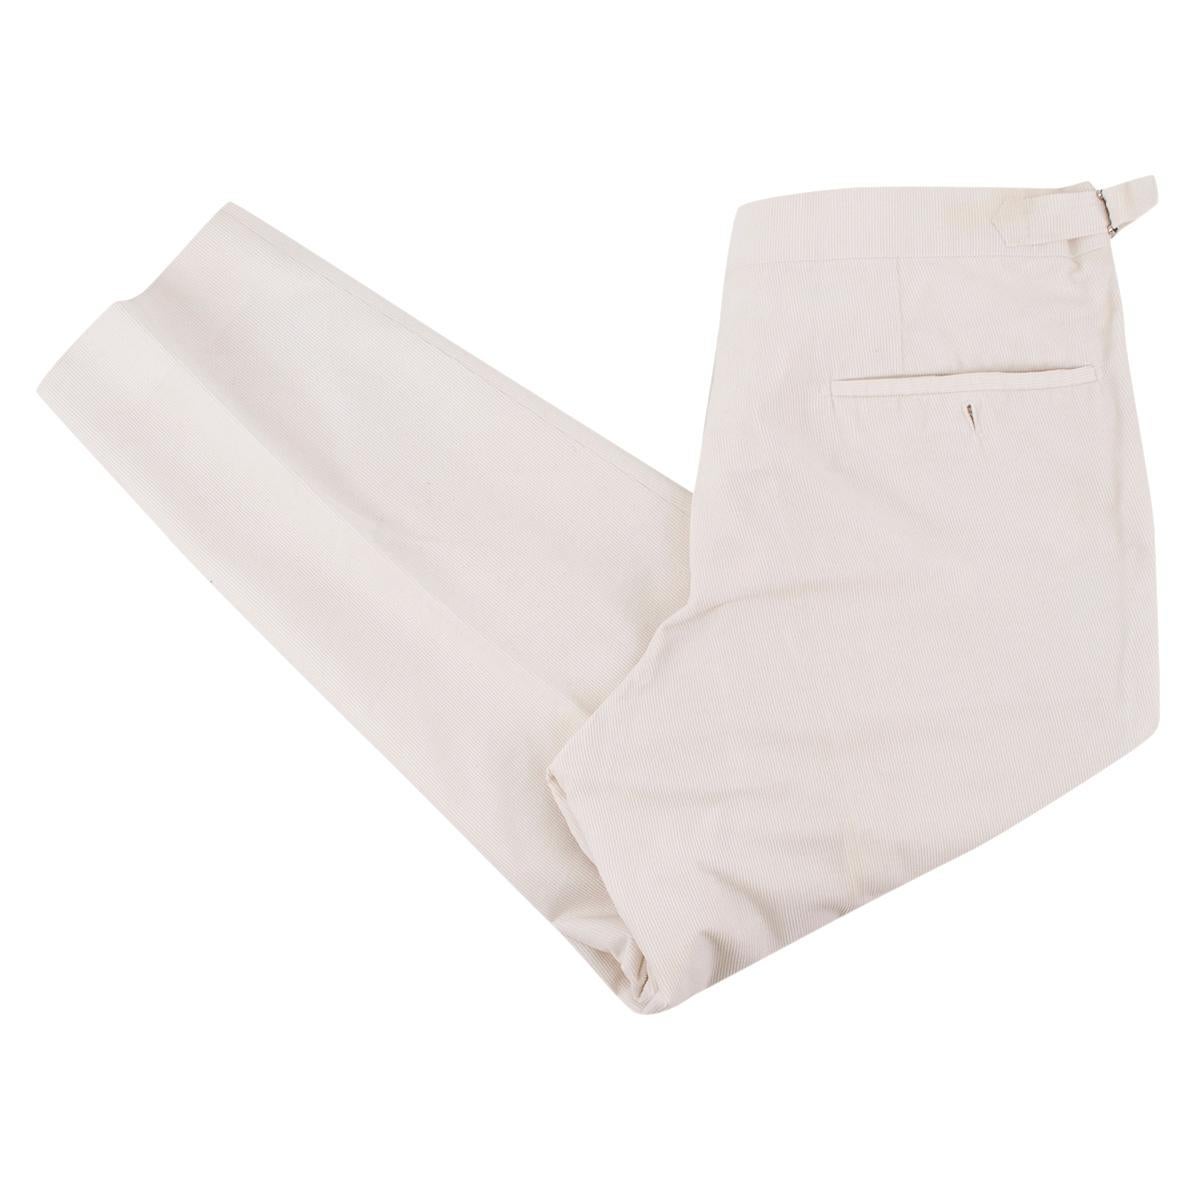 Gray Hardy Amies white corduroy trousers estimated size XL For Sale